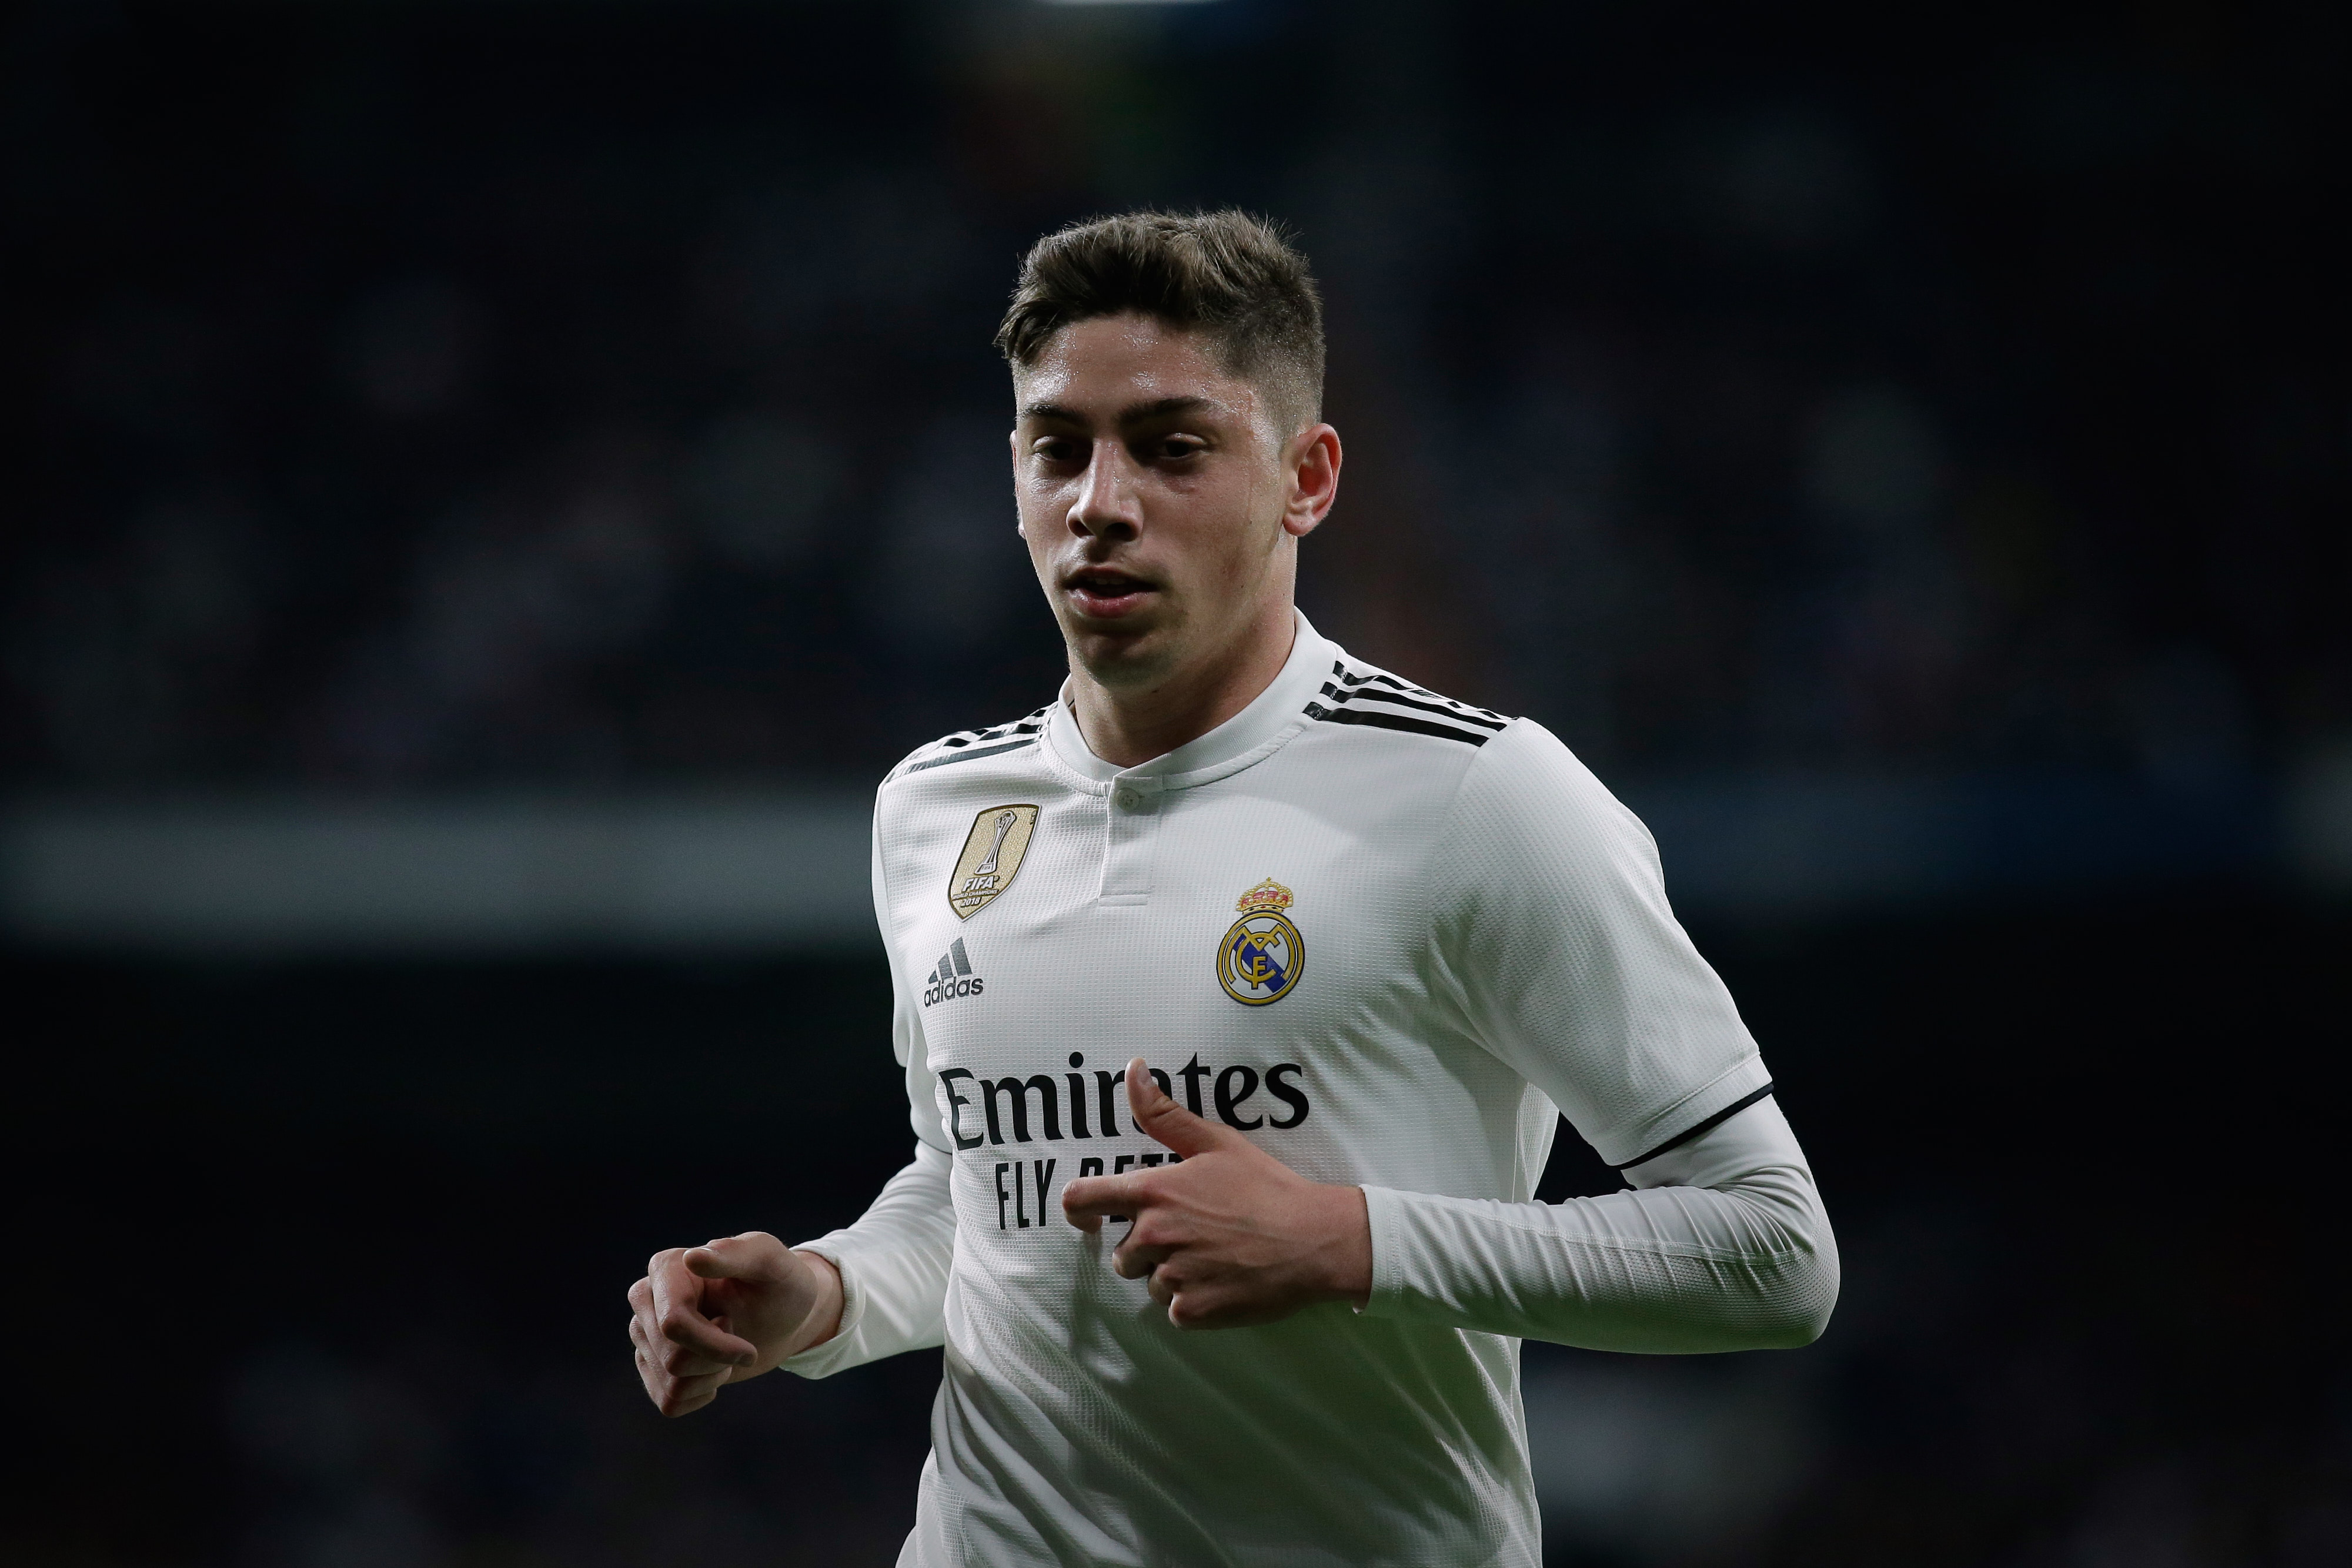 MADRID, SPAIN - MARCH 02: Federico Valverde of Real Madrid CF in action during the La Liga match between Real Madrid CF and FC Barcelona at Estadio Santiago Bernabeu on March 02, 2019 in Madrid, Spain. (Photo by Gonzalo Arroyo Moreno/Getty Images)